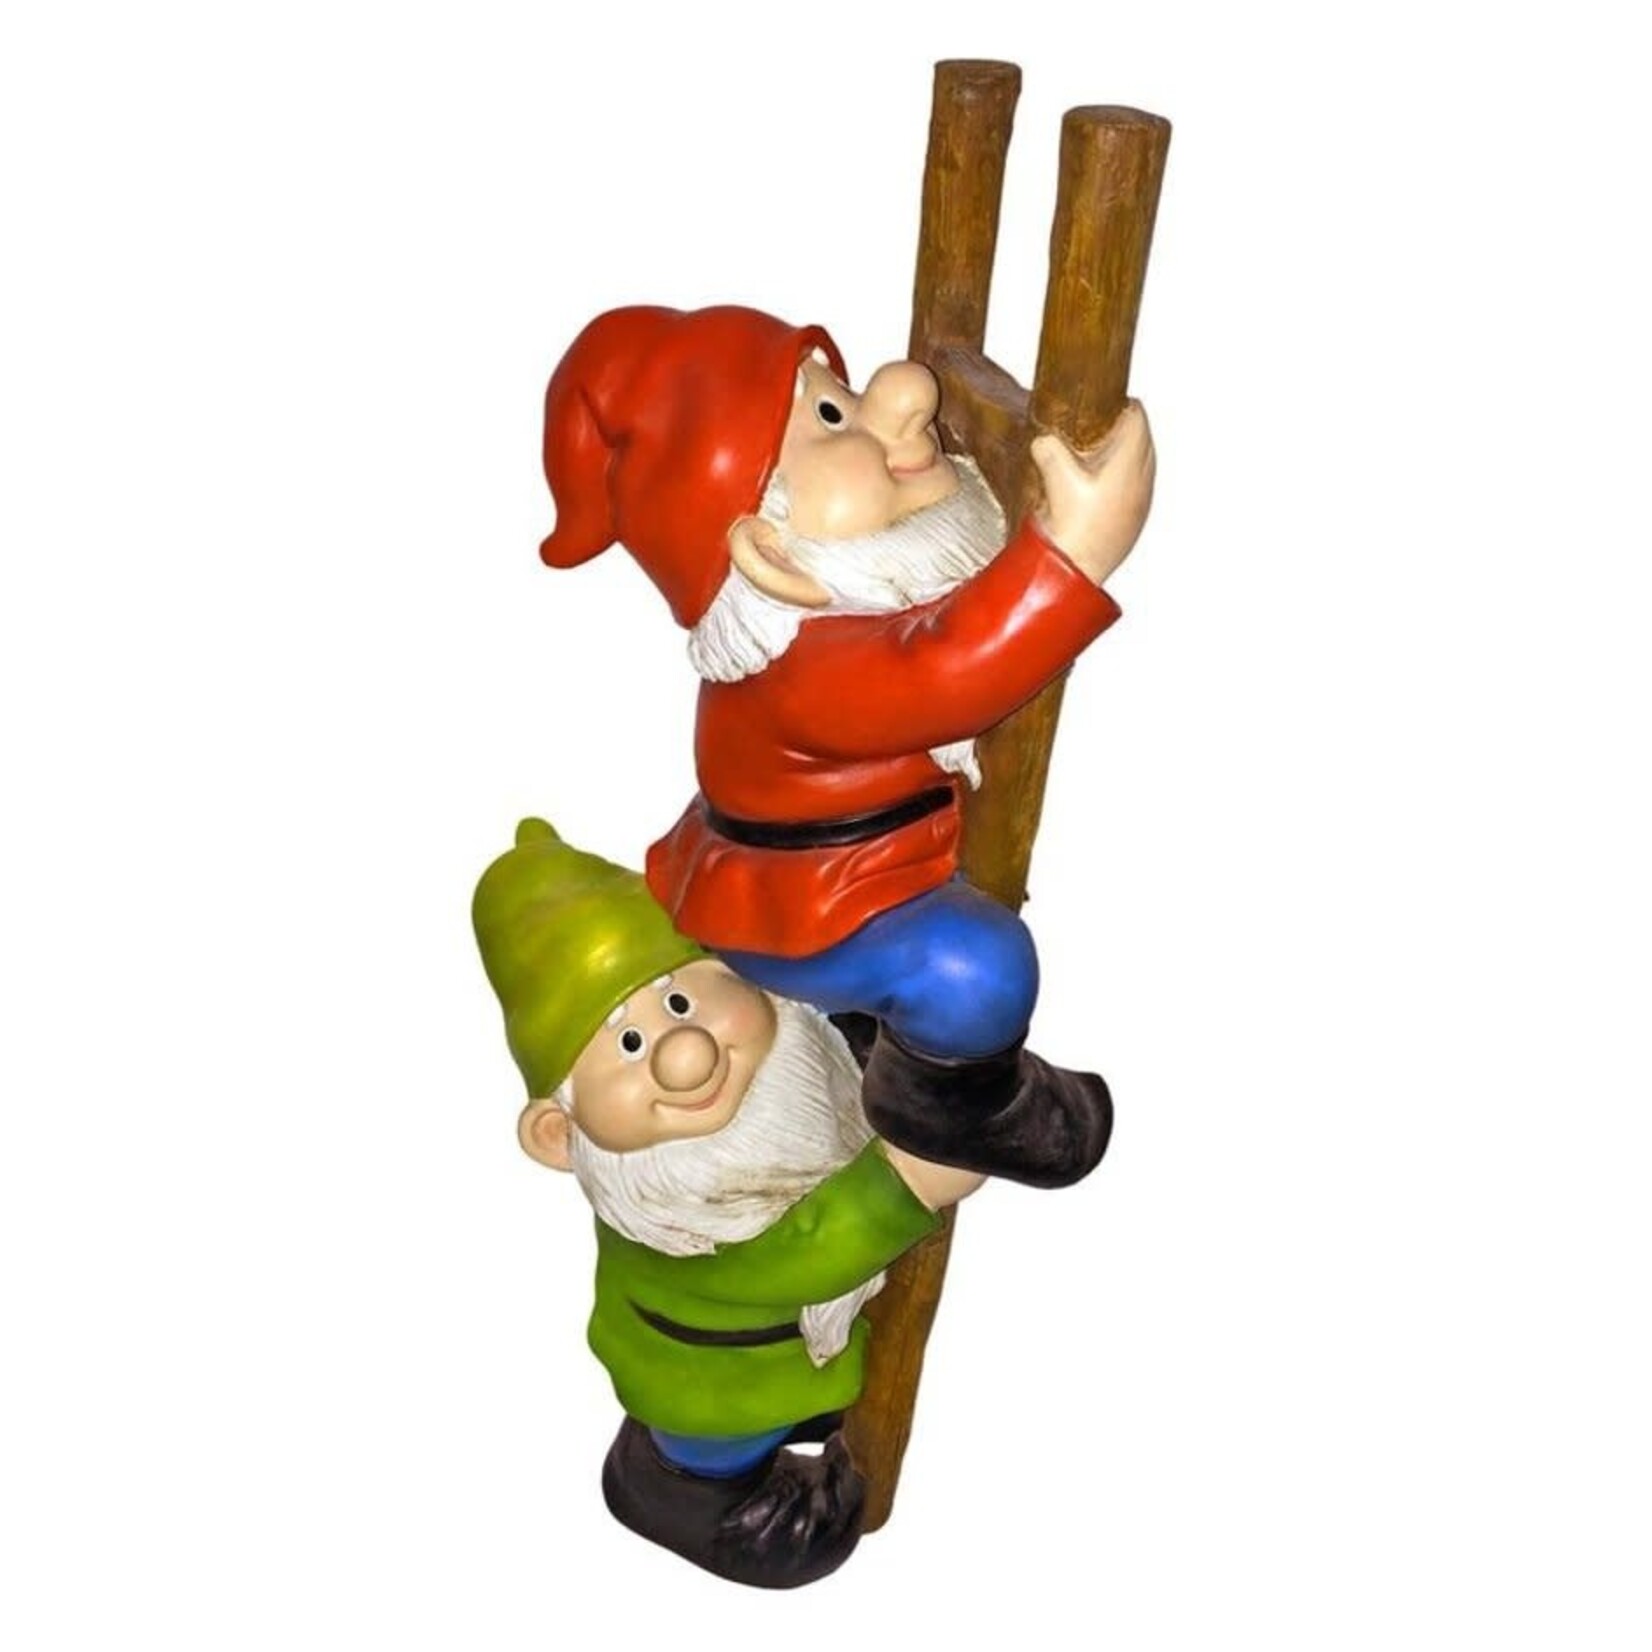 Up the Ladder: Climbing Garden Gnome Statue (I-6)